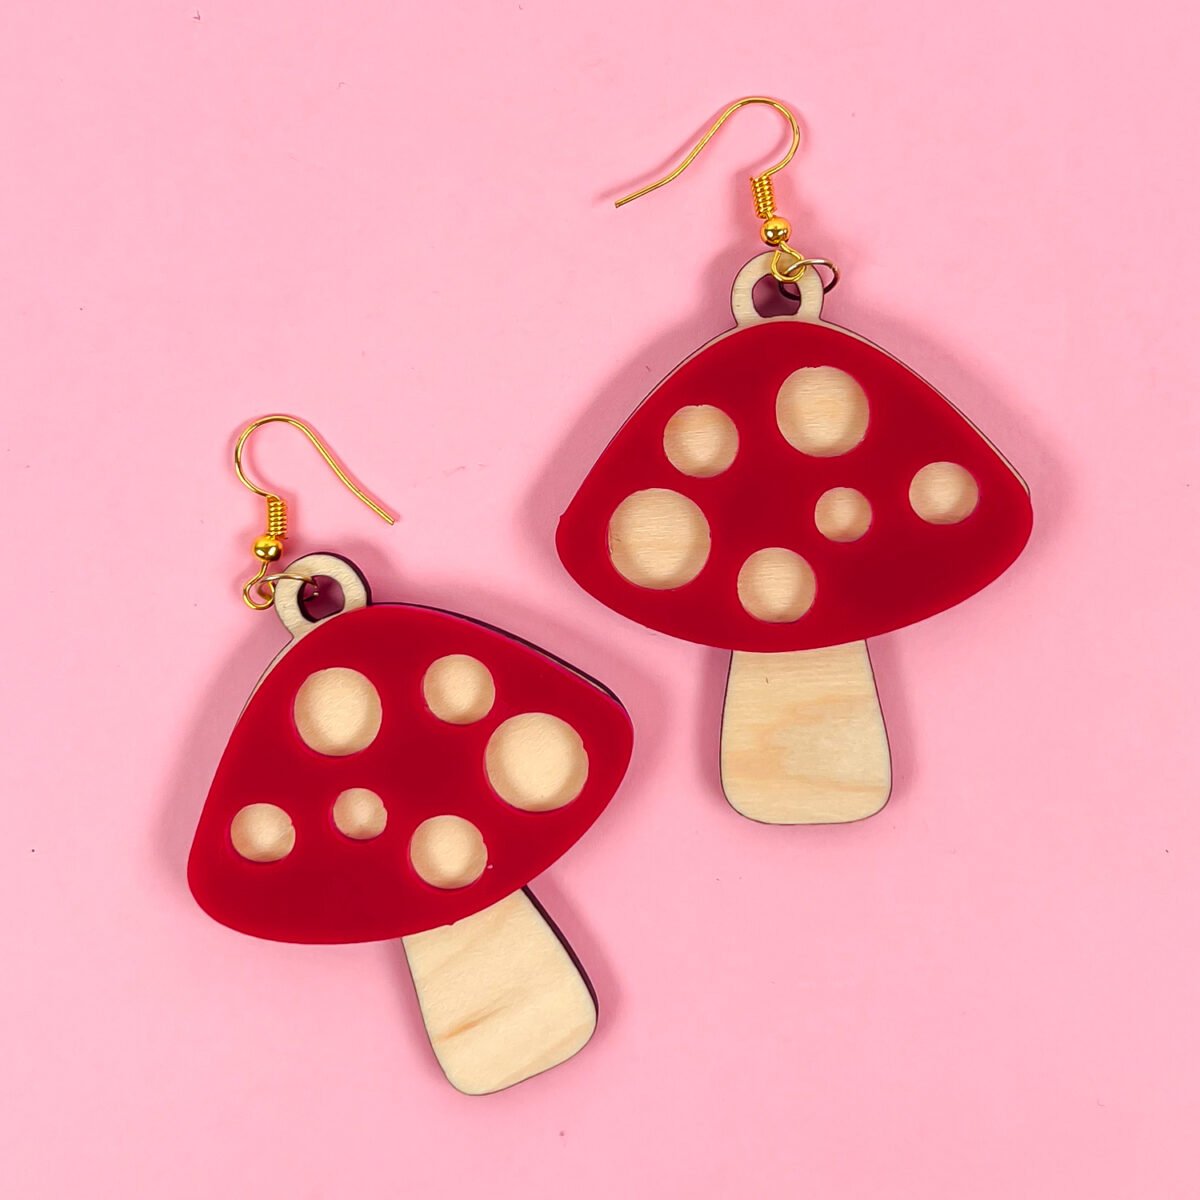 Red and wood mushroom earrings on pink background